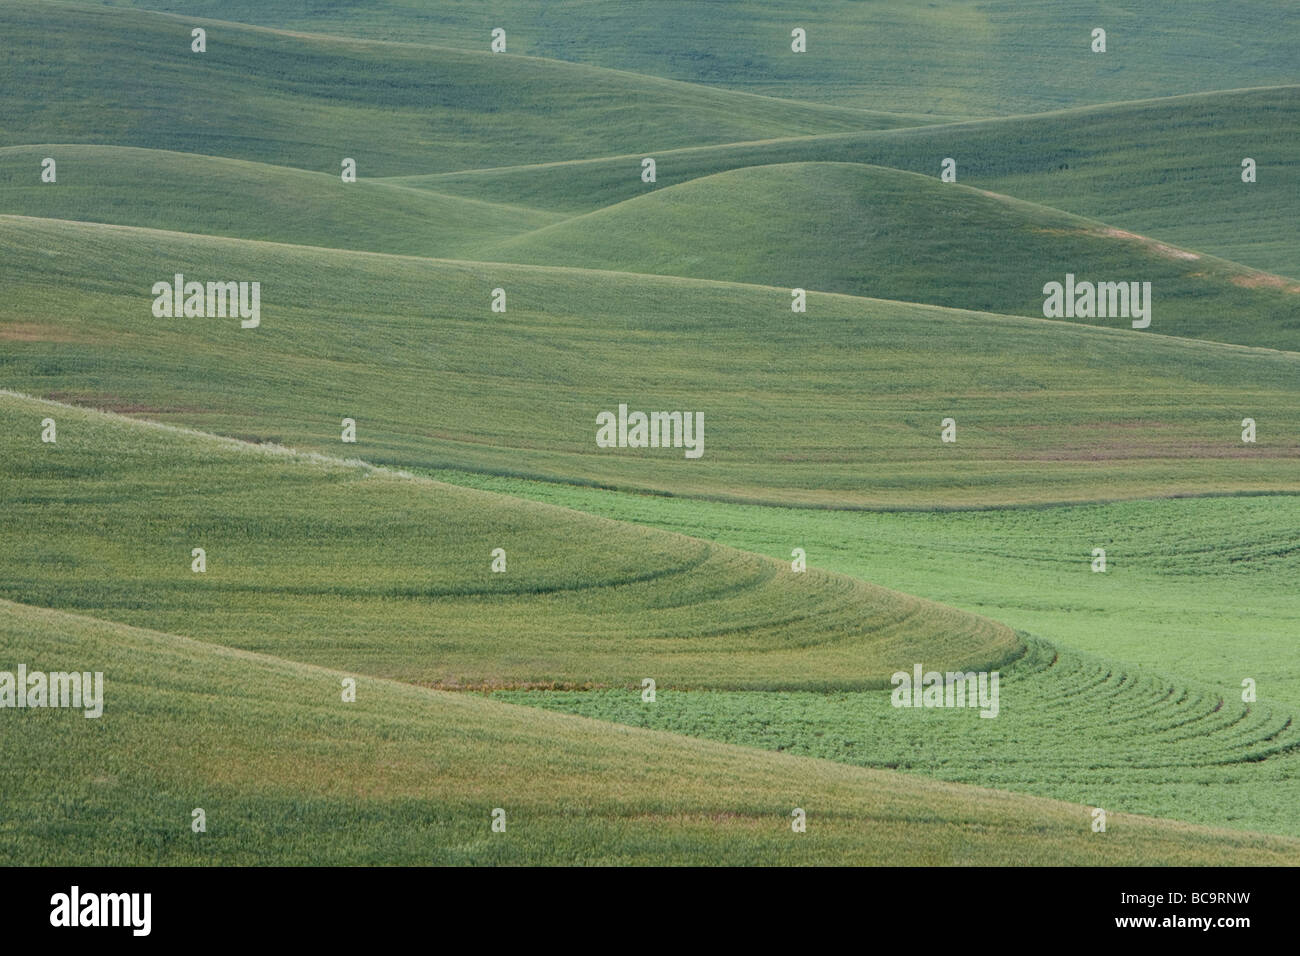 Whitman County, Palouse Country, Southeastern Washington State. Cultivated Fields of Wheat and Lentils. Stock Photo